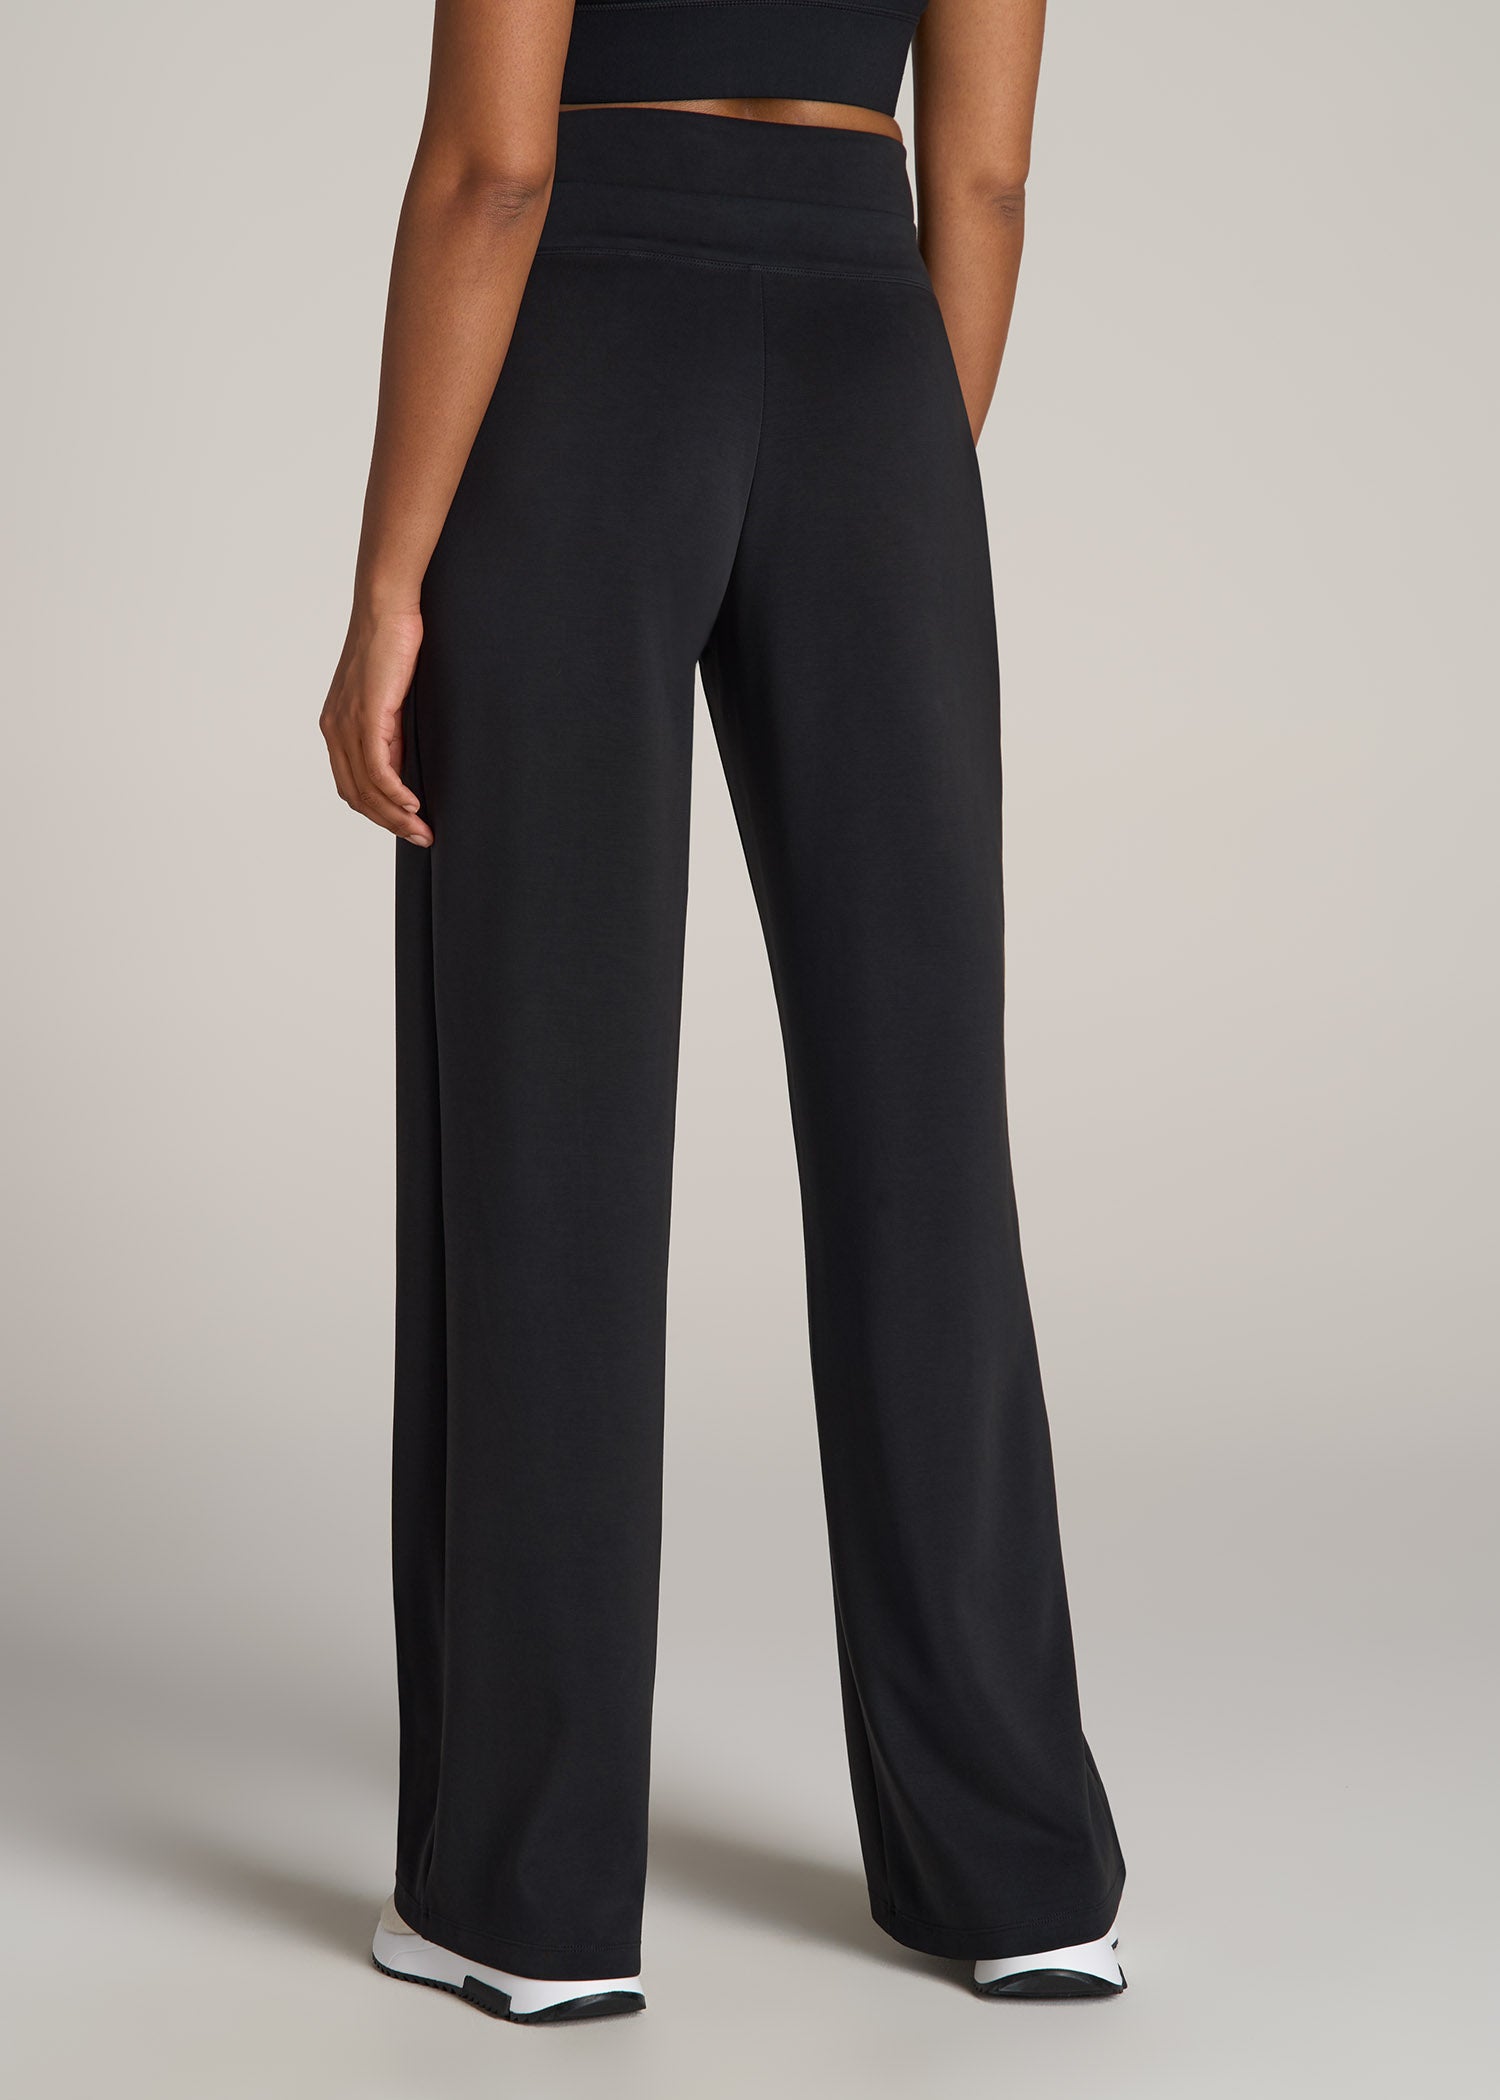 Wide Leg Ultra High Rise Pant for Tall Women in Black